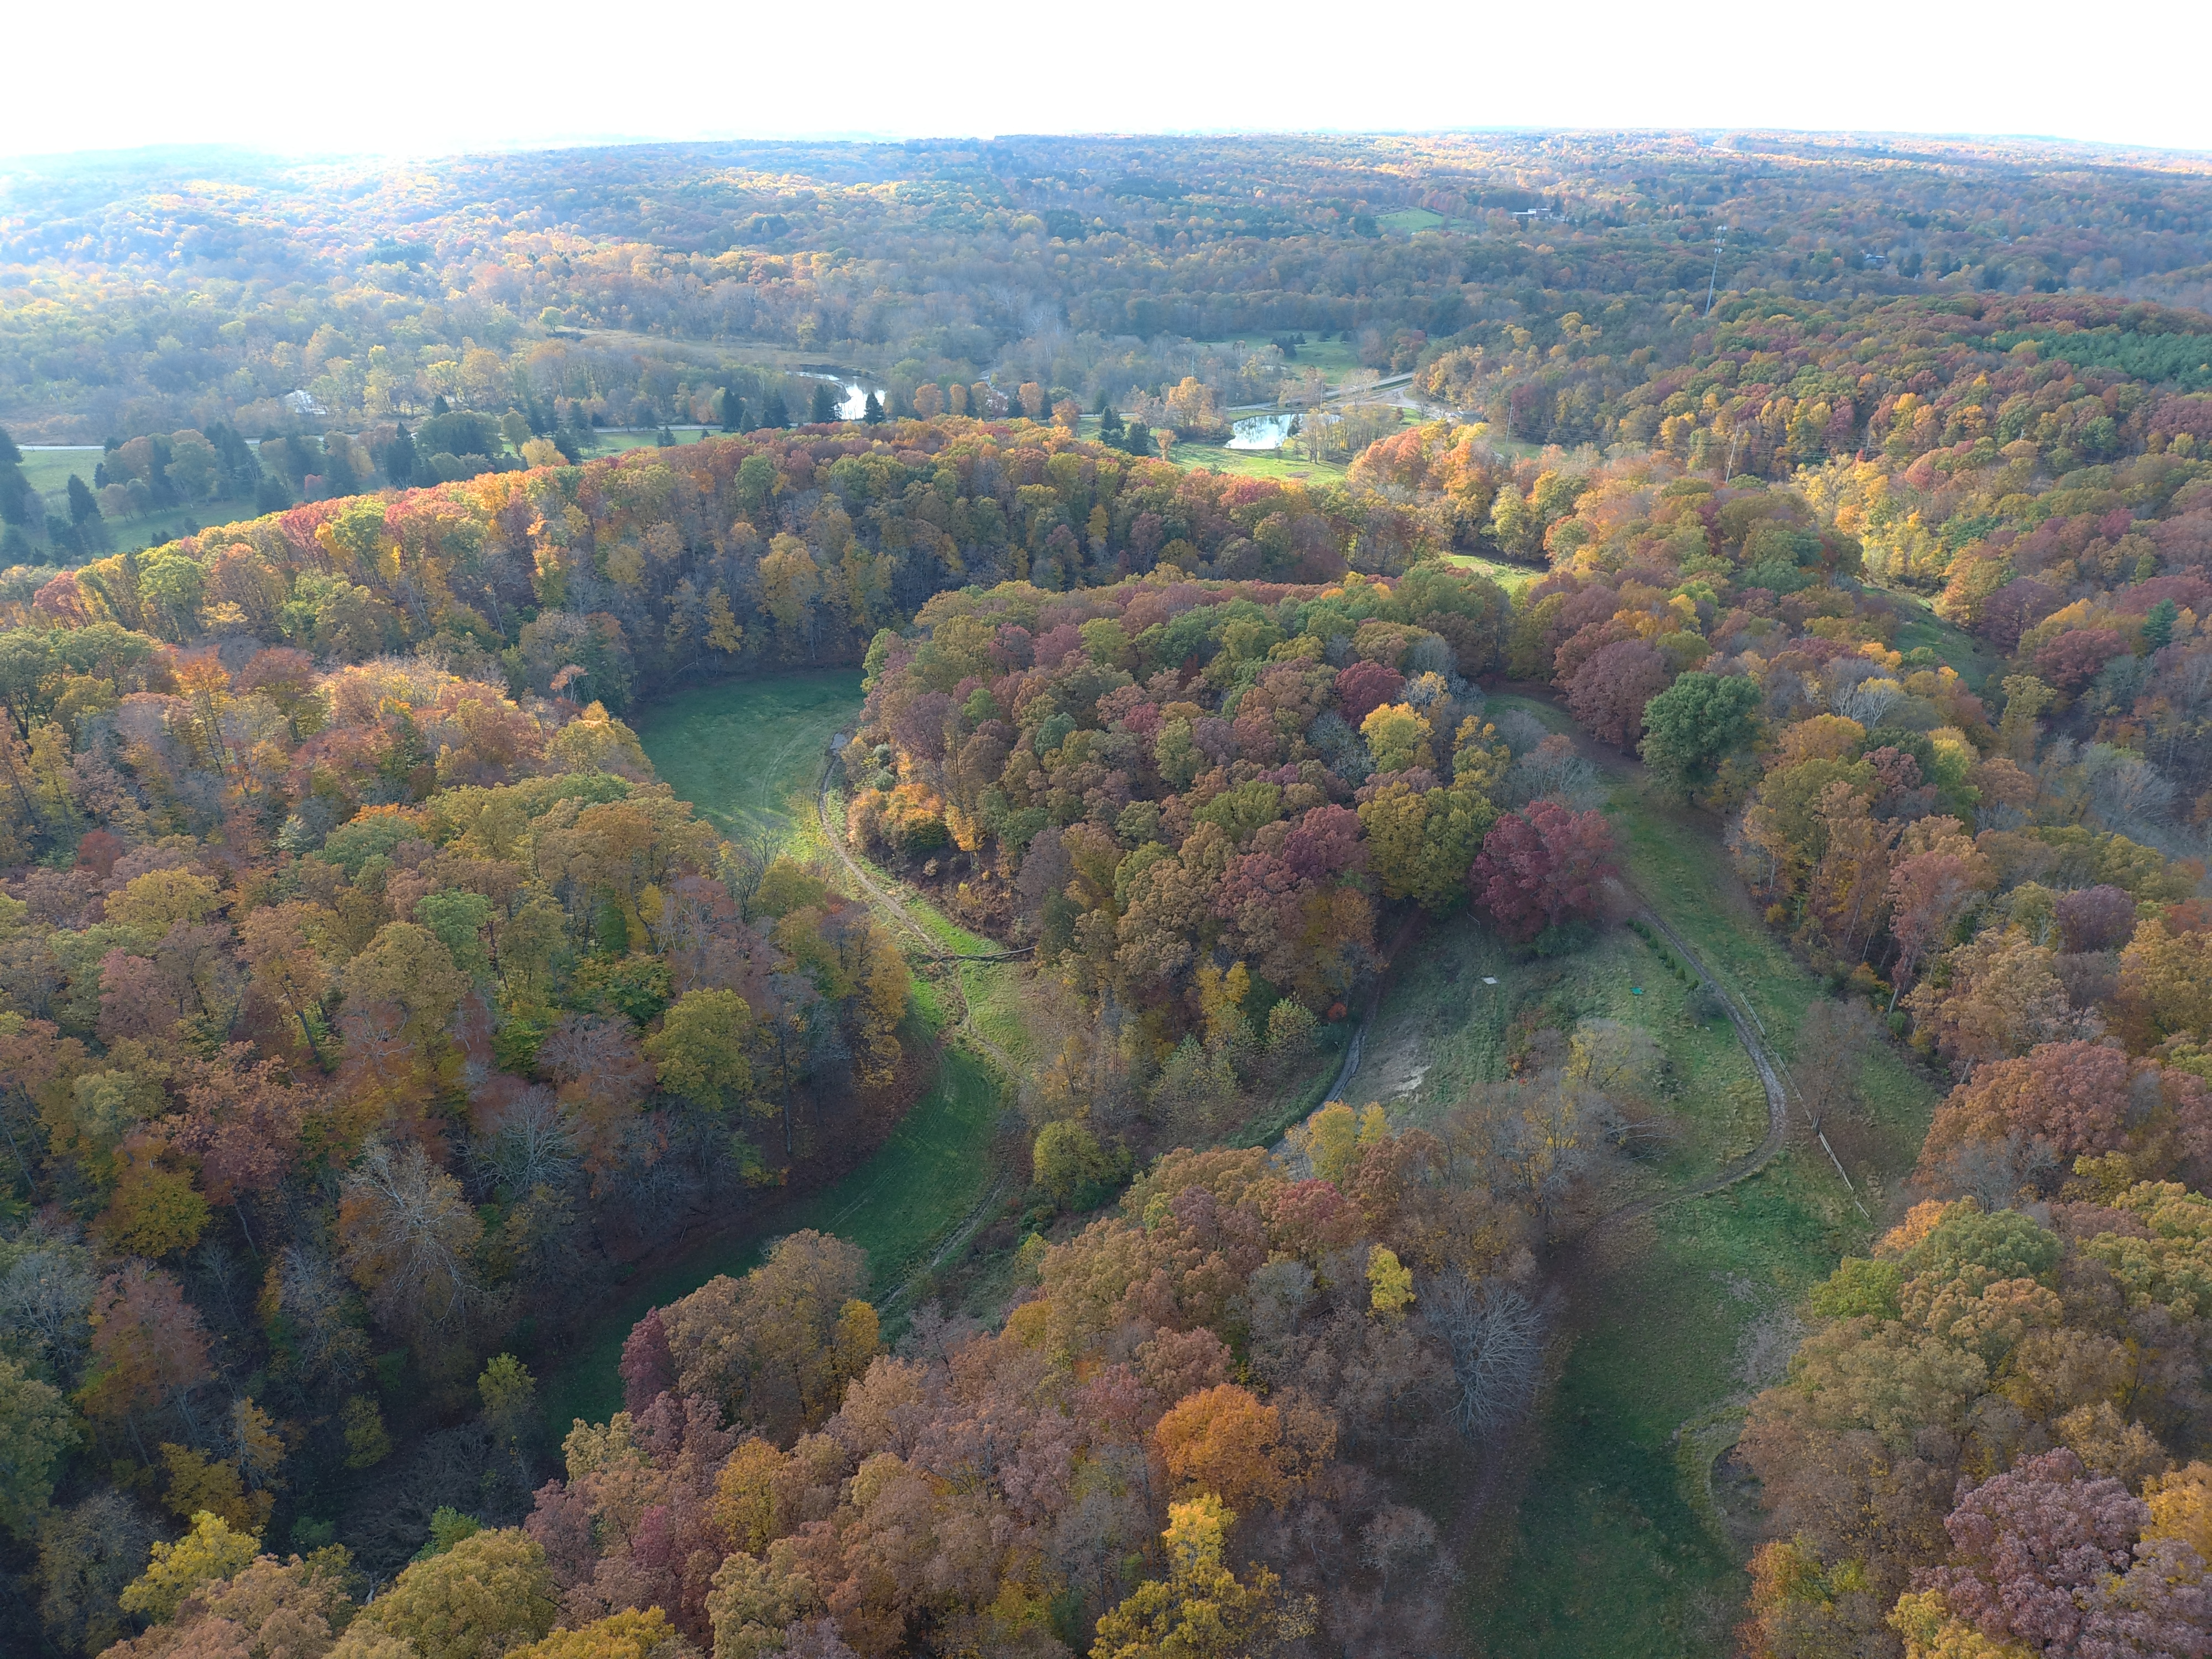 Aerial view showing trees and golf course greens